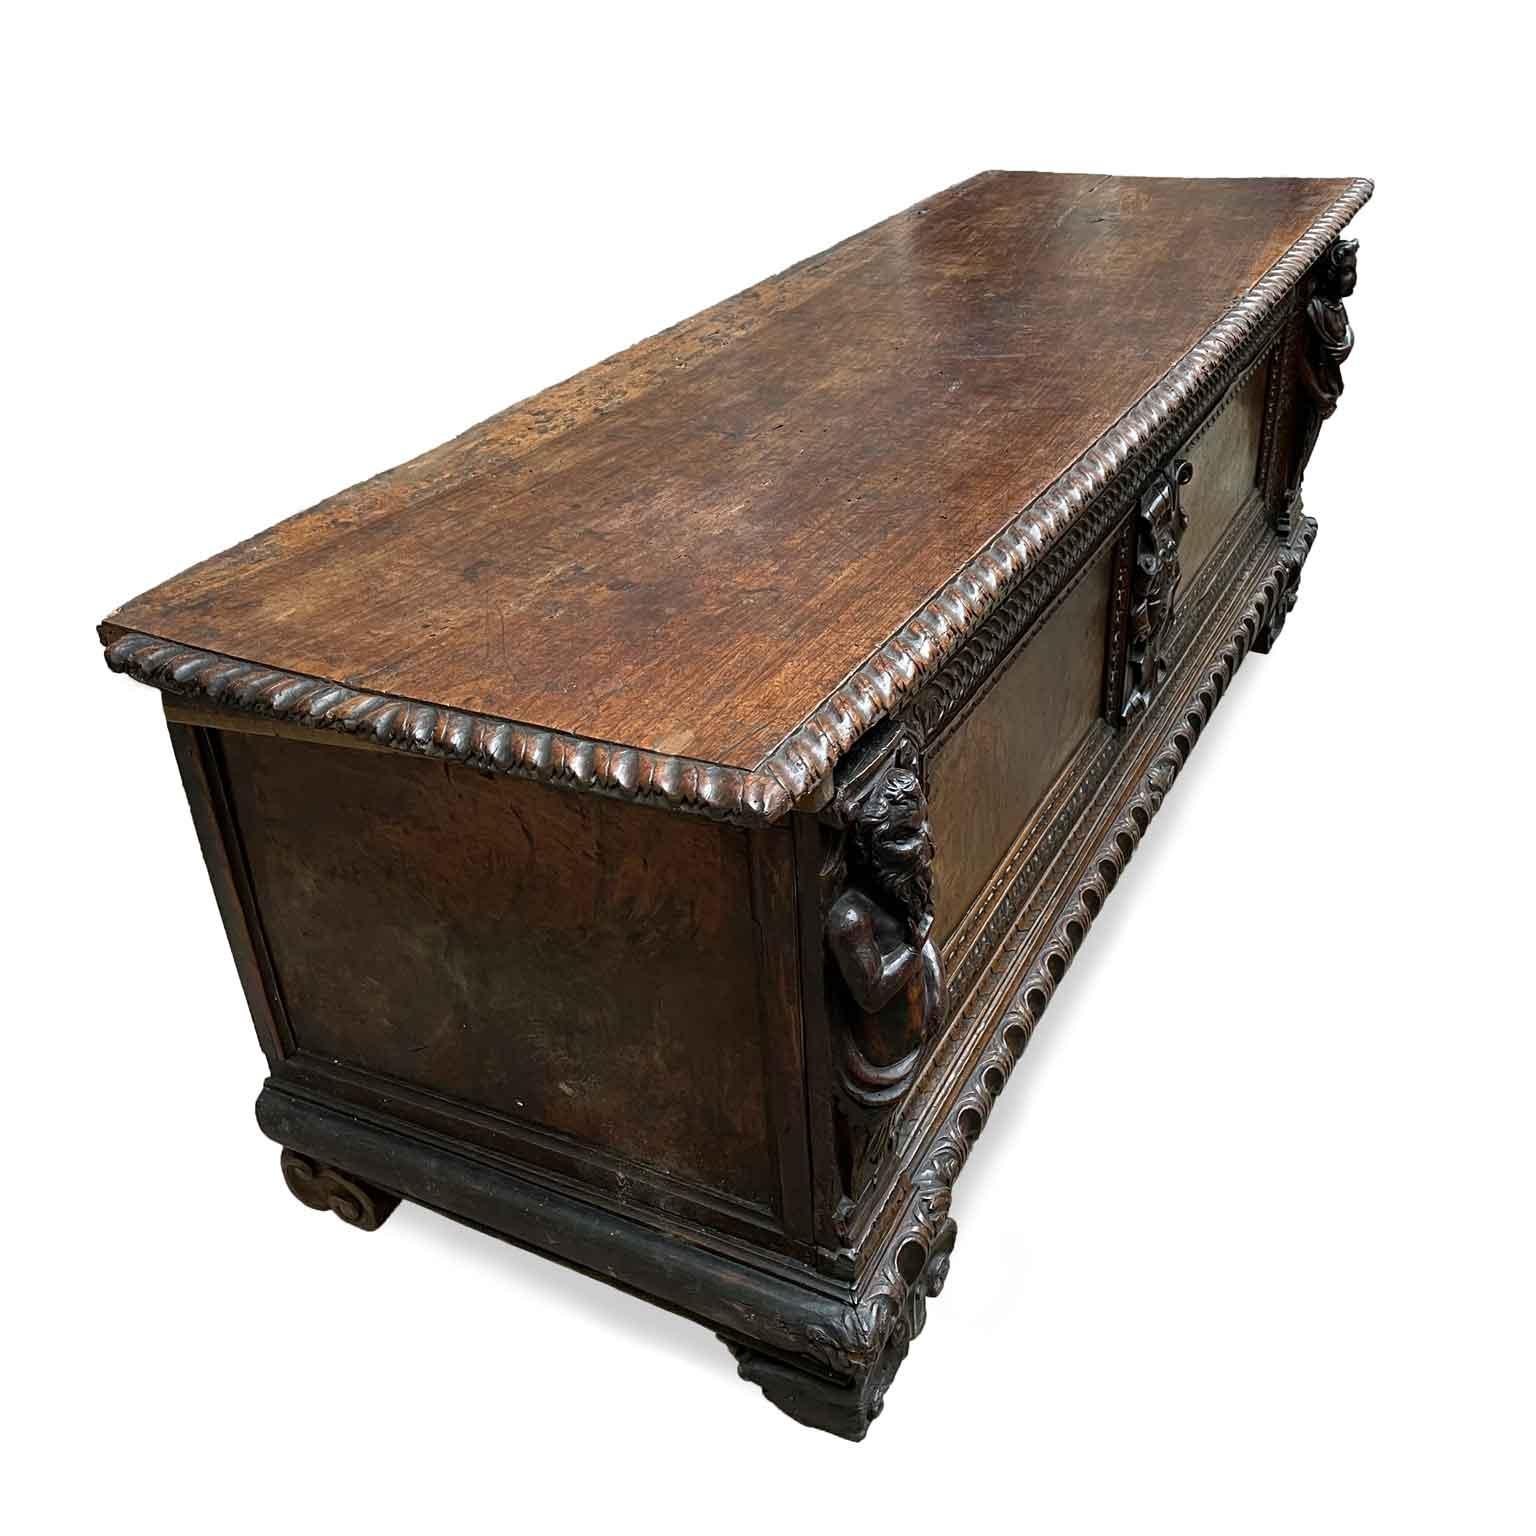 17th Century Italian Walnut Chest Arms and Caryatids Carving Renaissance Trunk 2